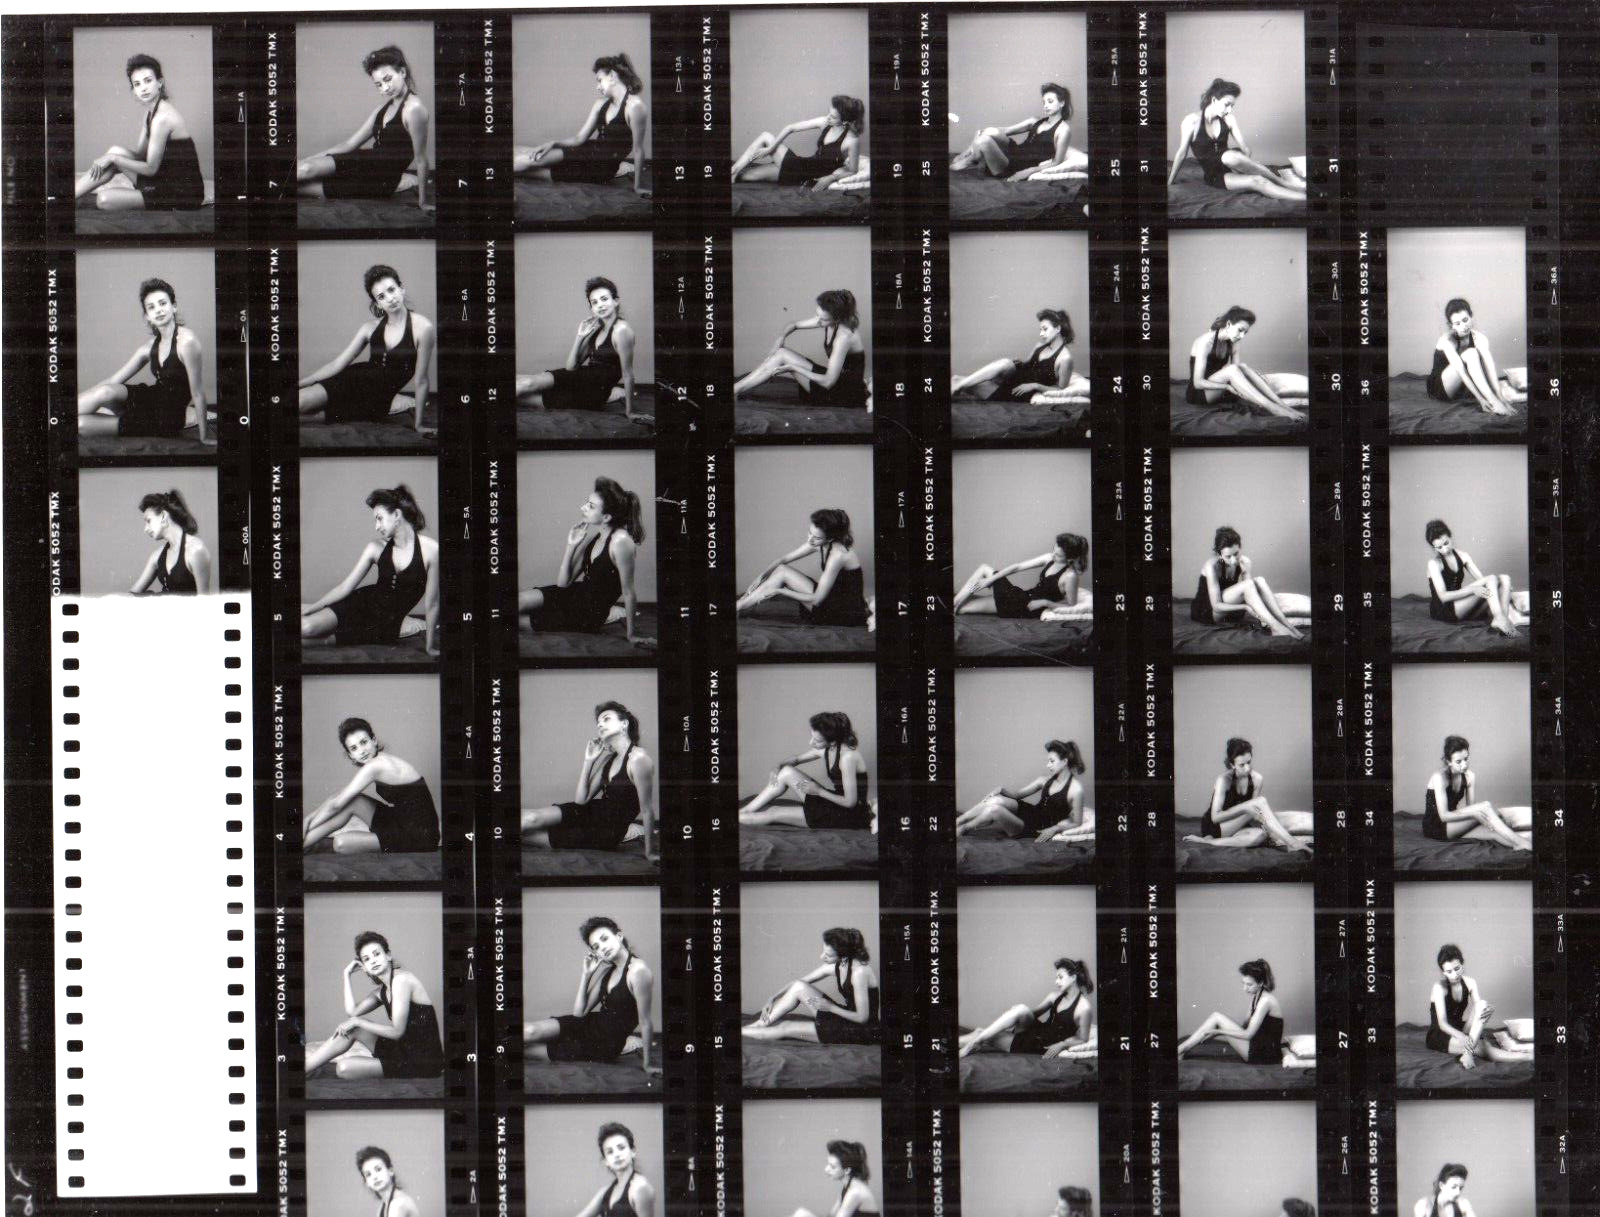 Vintage B&W CONTACT SHEET Art Posed Photoshoot - Girlie - Sexy  Lady